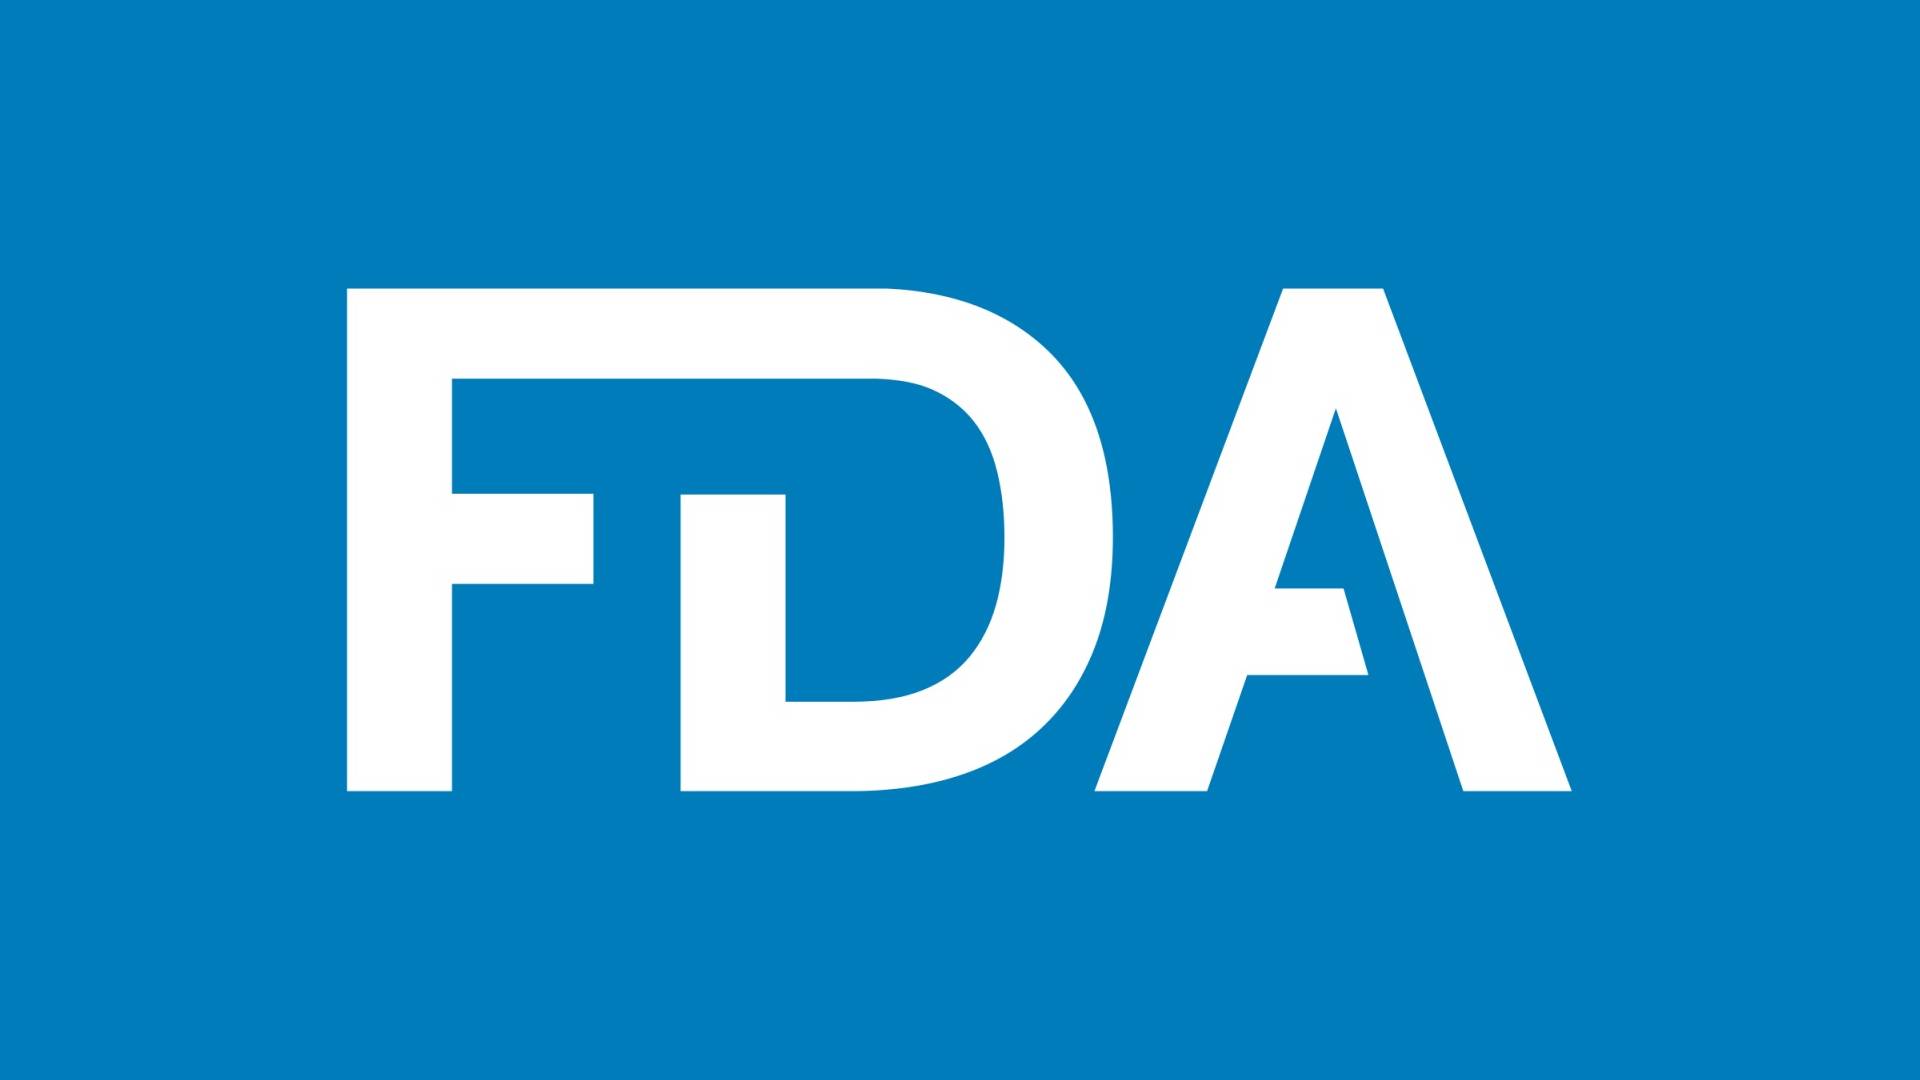 Health News Roundup: US FDA approves Novo Nordisk's Wegovy for lowering heart risks; Acadia to stop trials of antipsychotic drug after it fails schizophrenia study and more